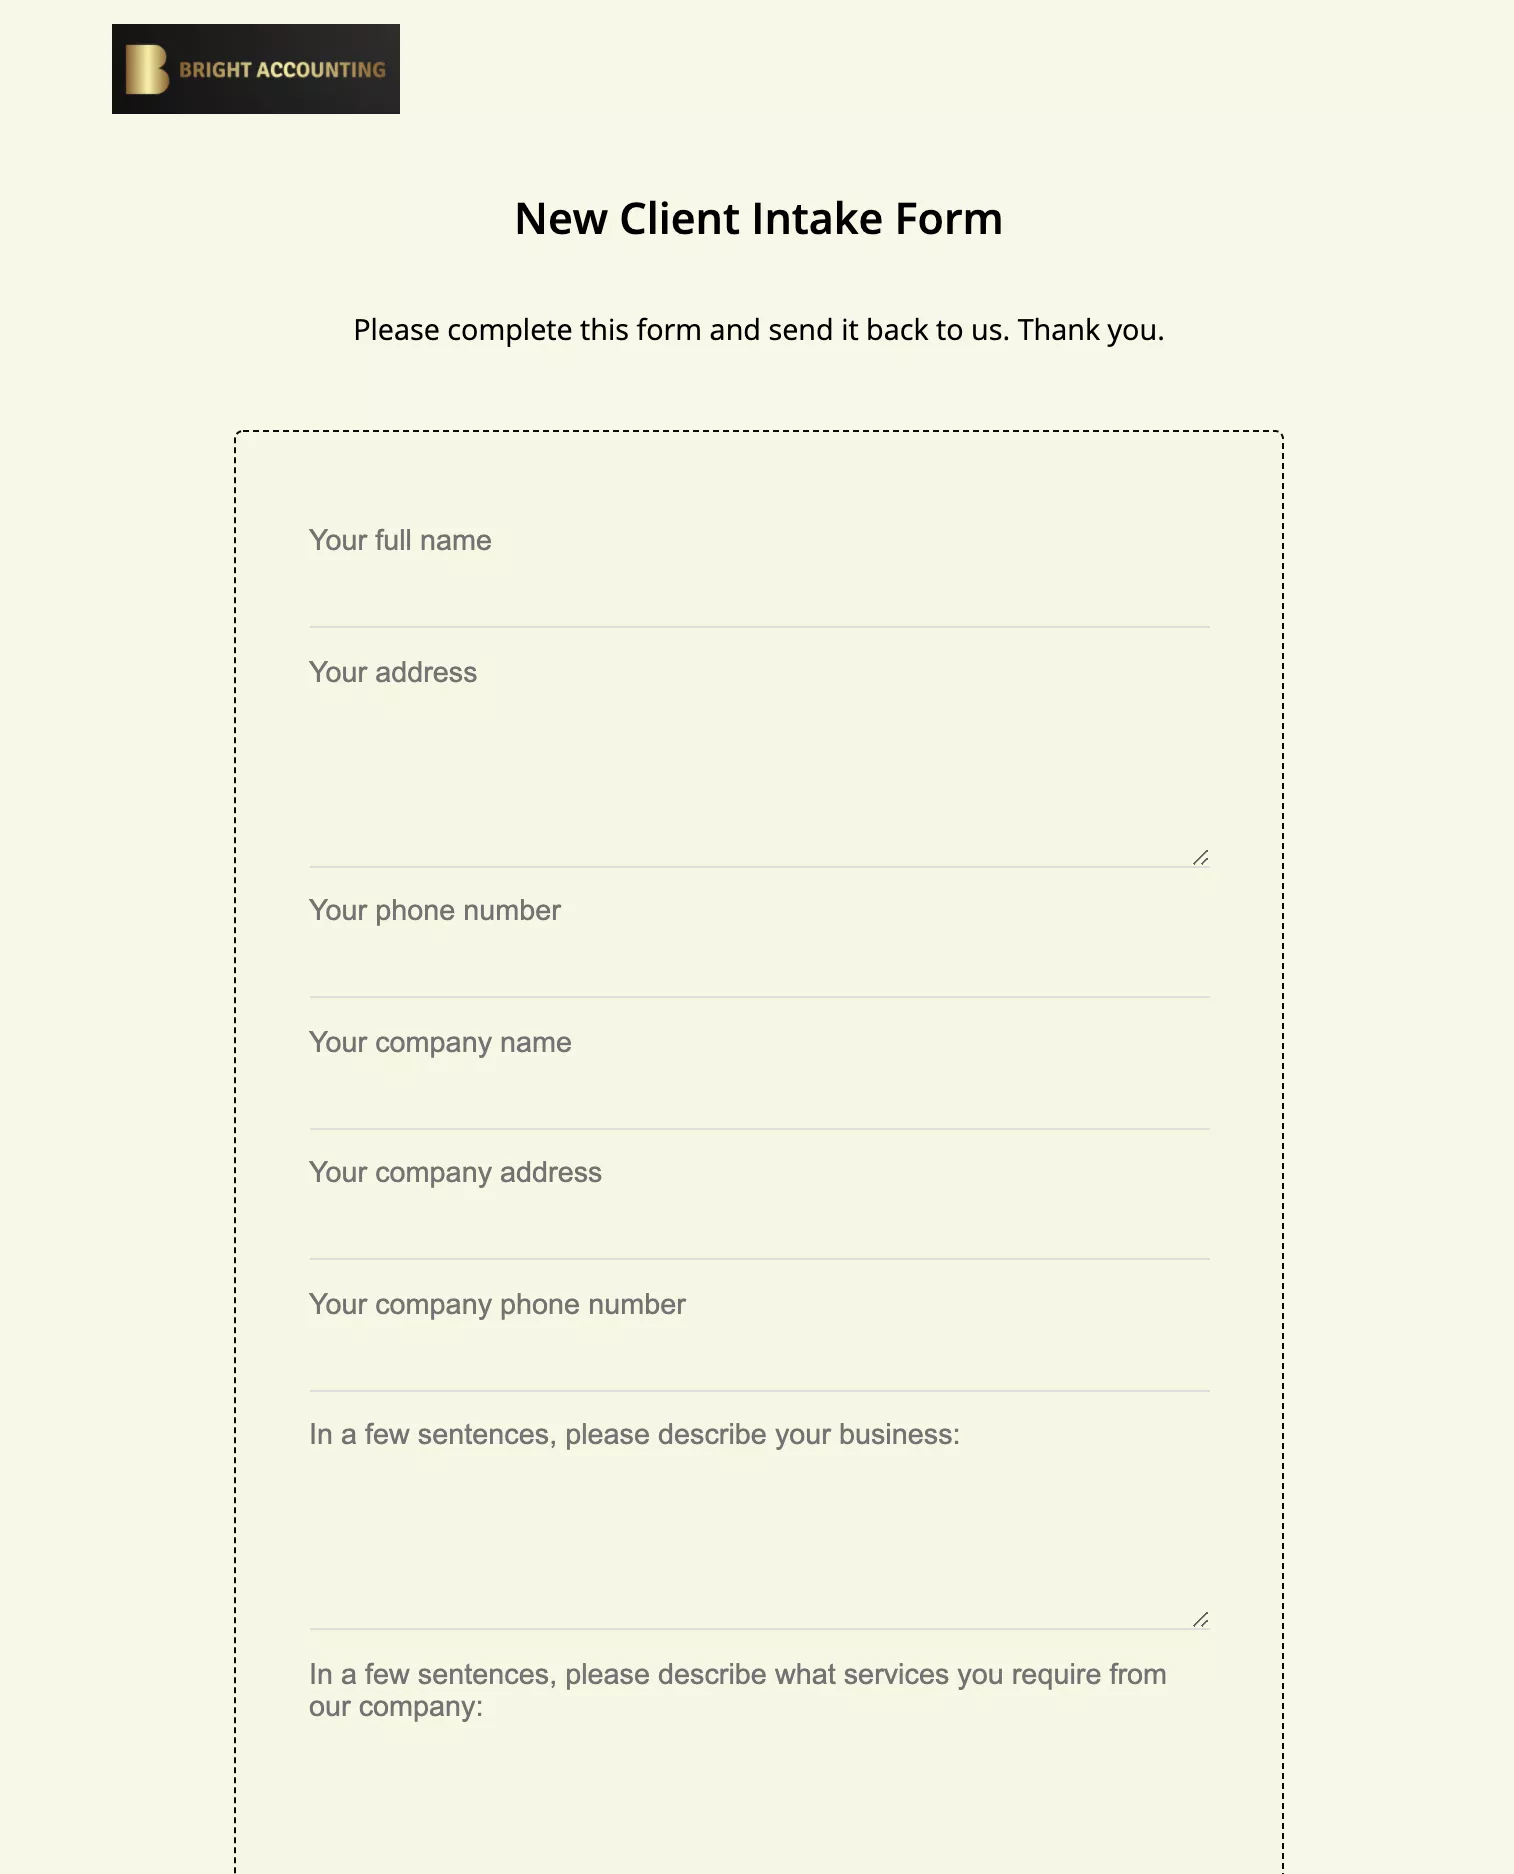 Accounting client intake form